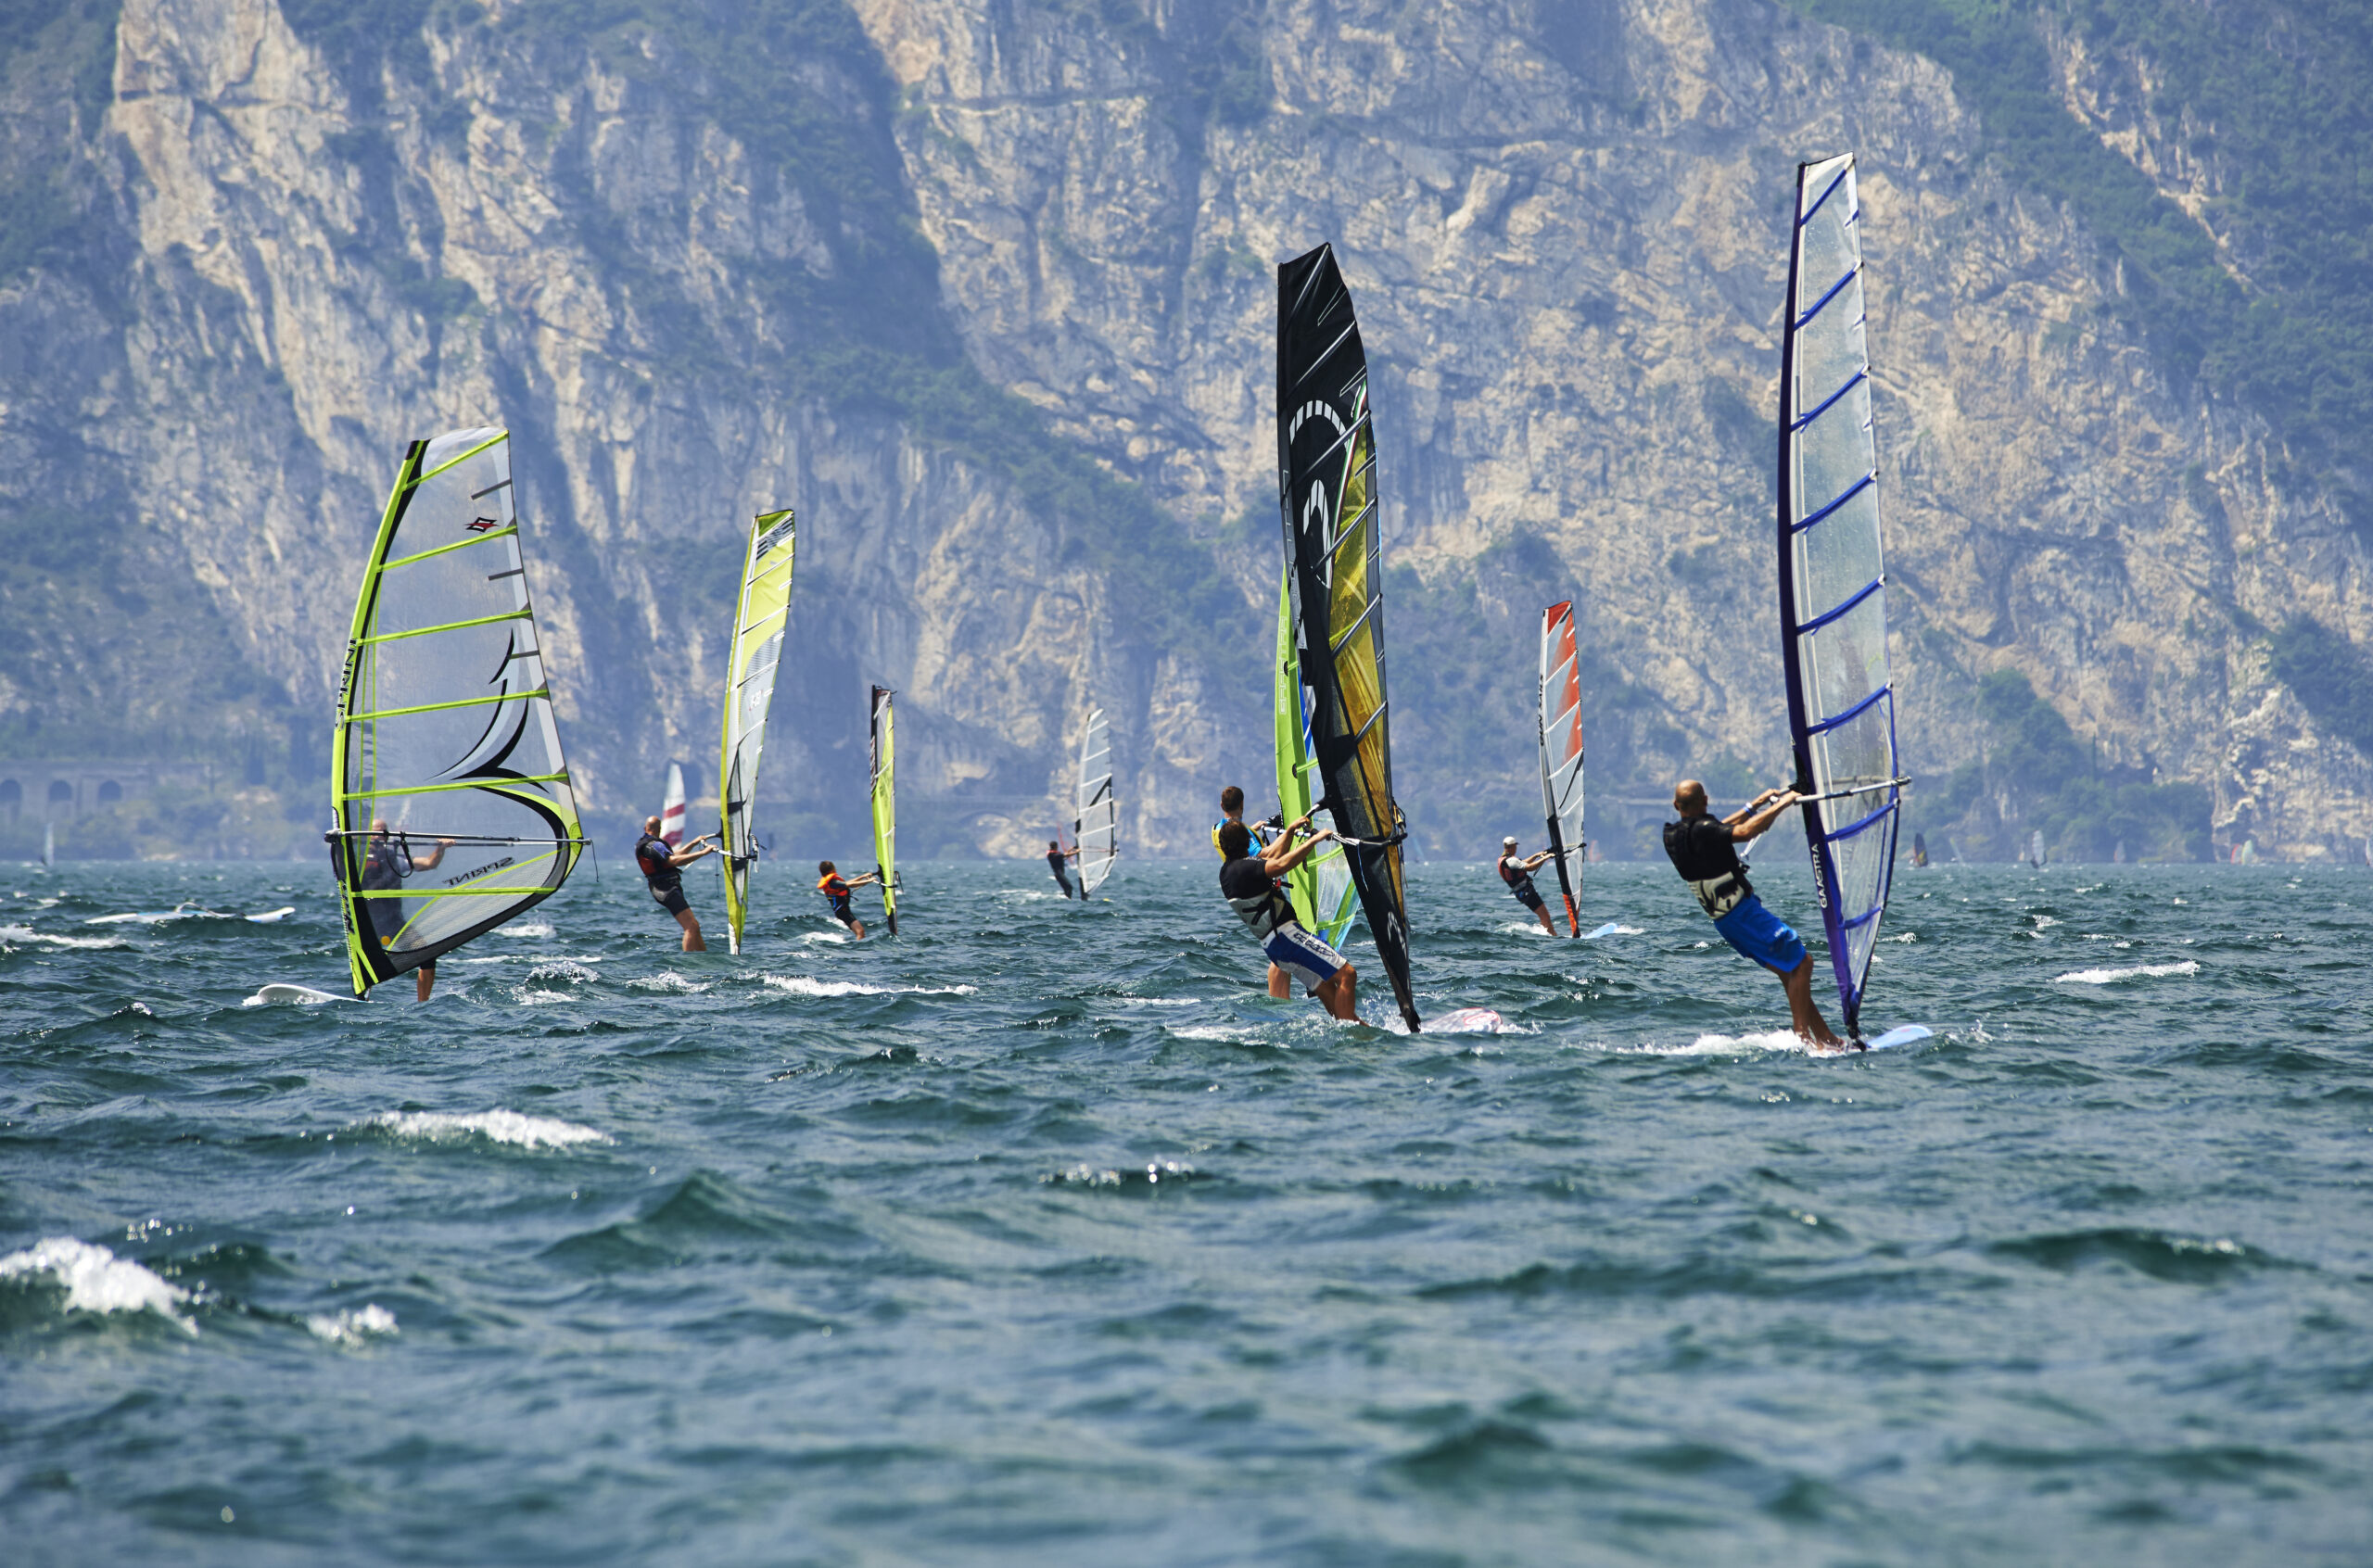 Capture the adrenaline of exciting water sports on the shores of Lake Garda, an unforgettable experience of adventure and water fun